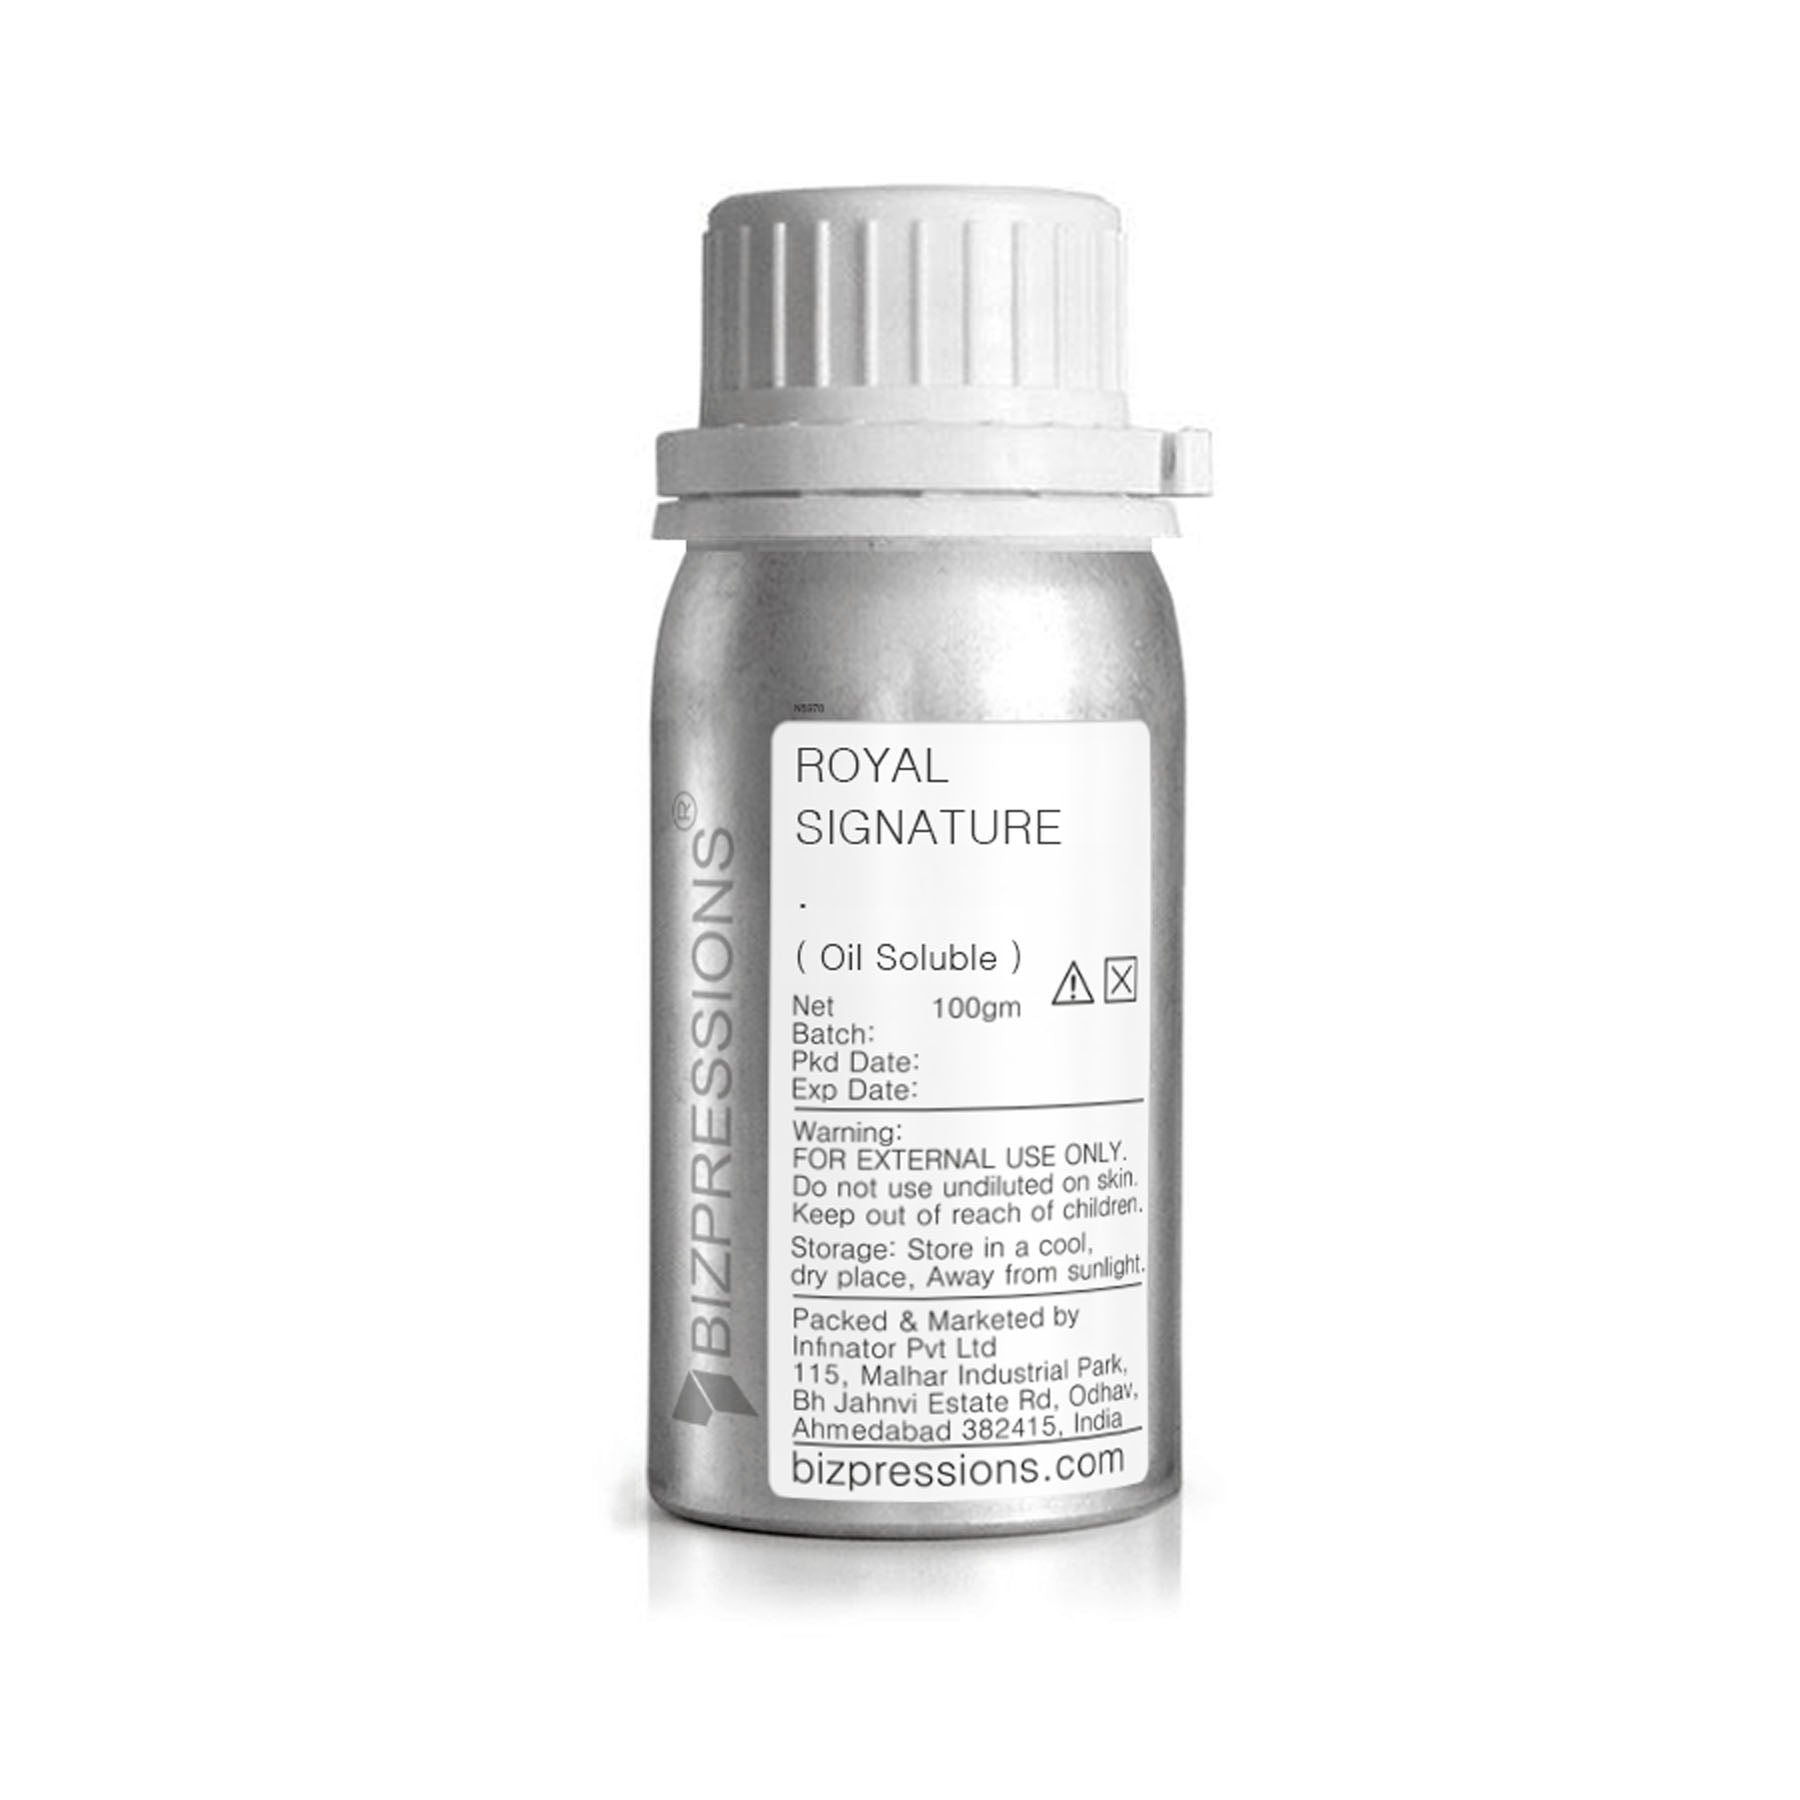 ROYAL SIGNATURE - Fragrance ( Oil Soluble ) - 100 gm